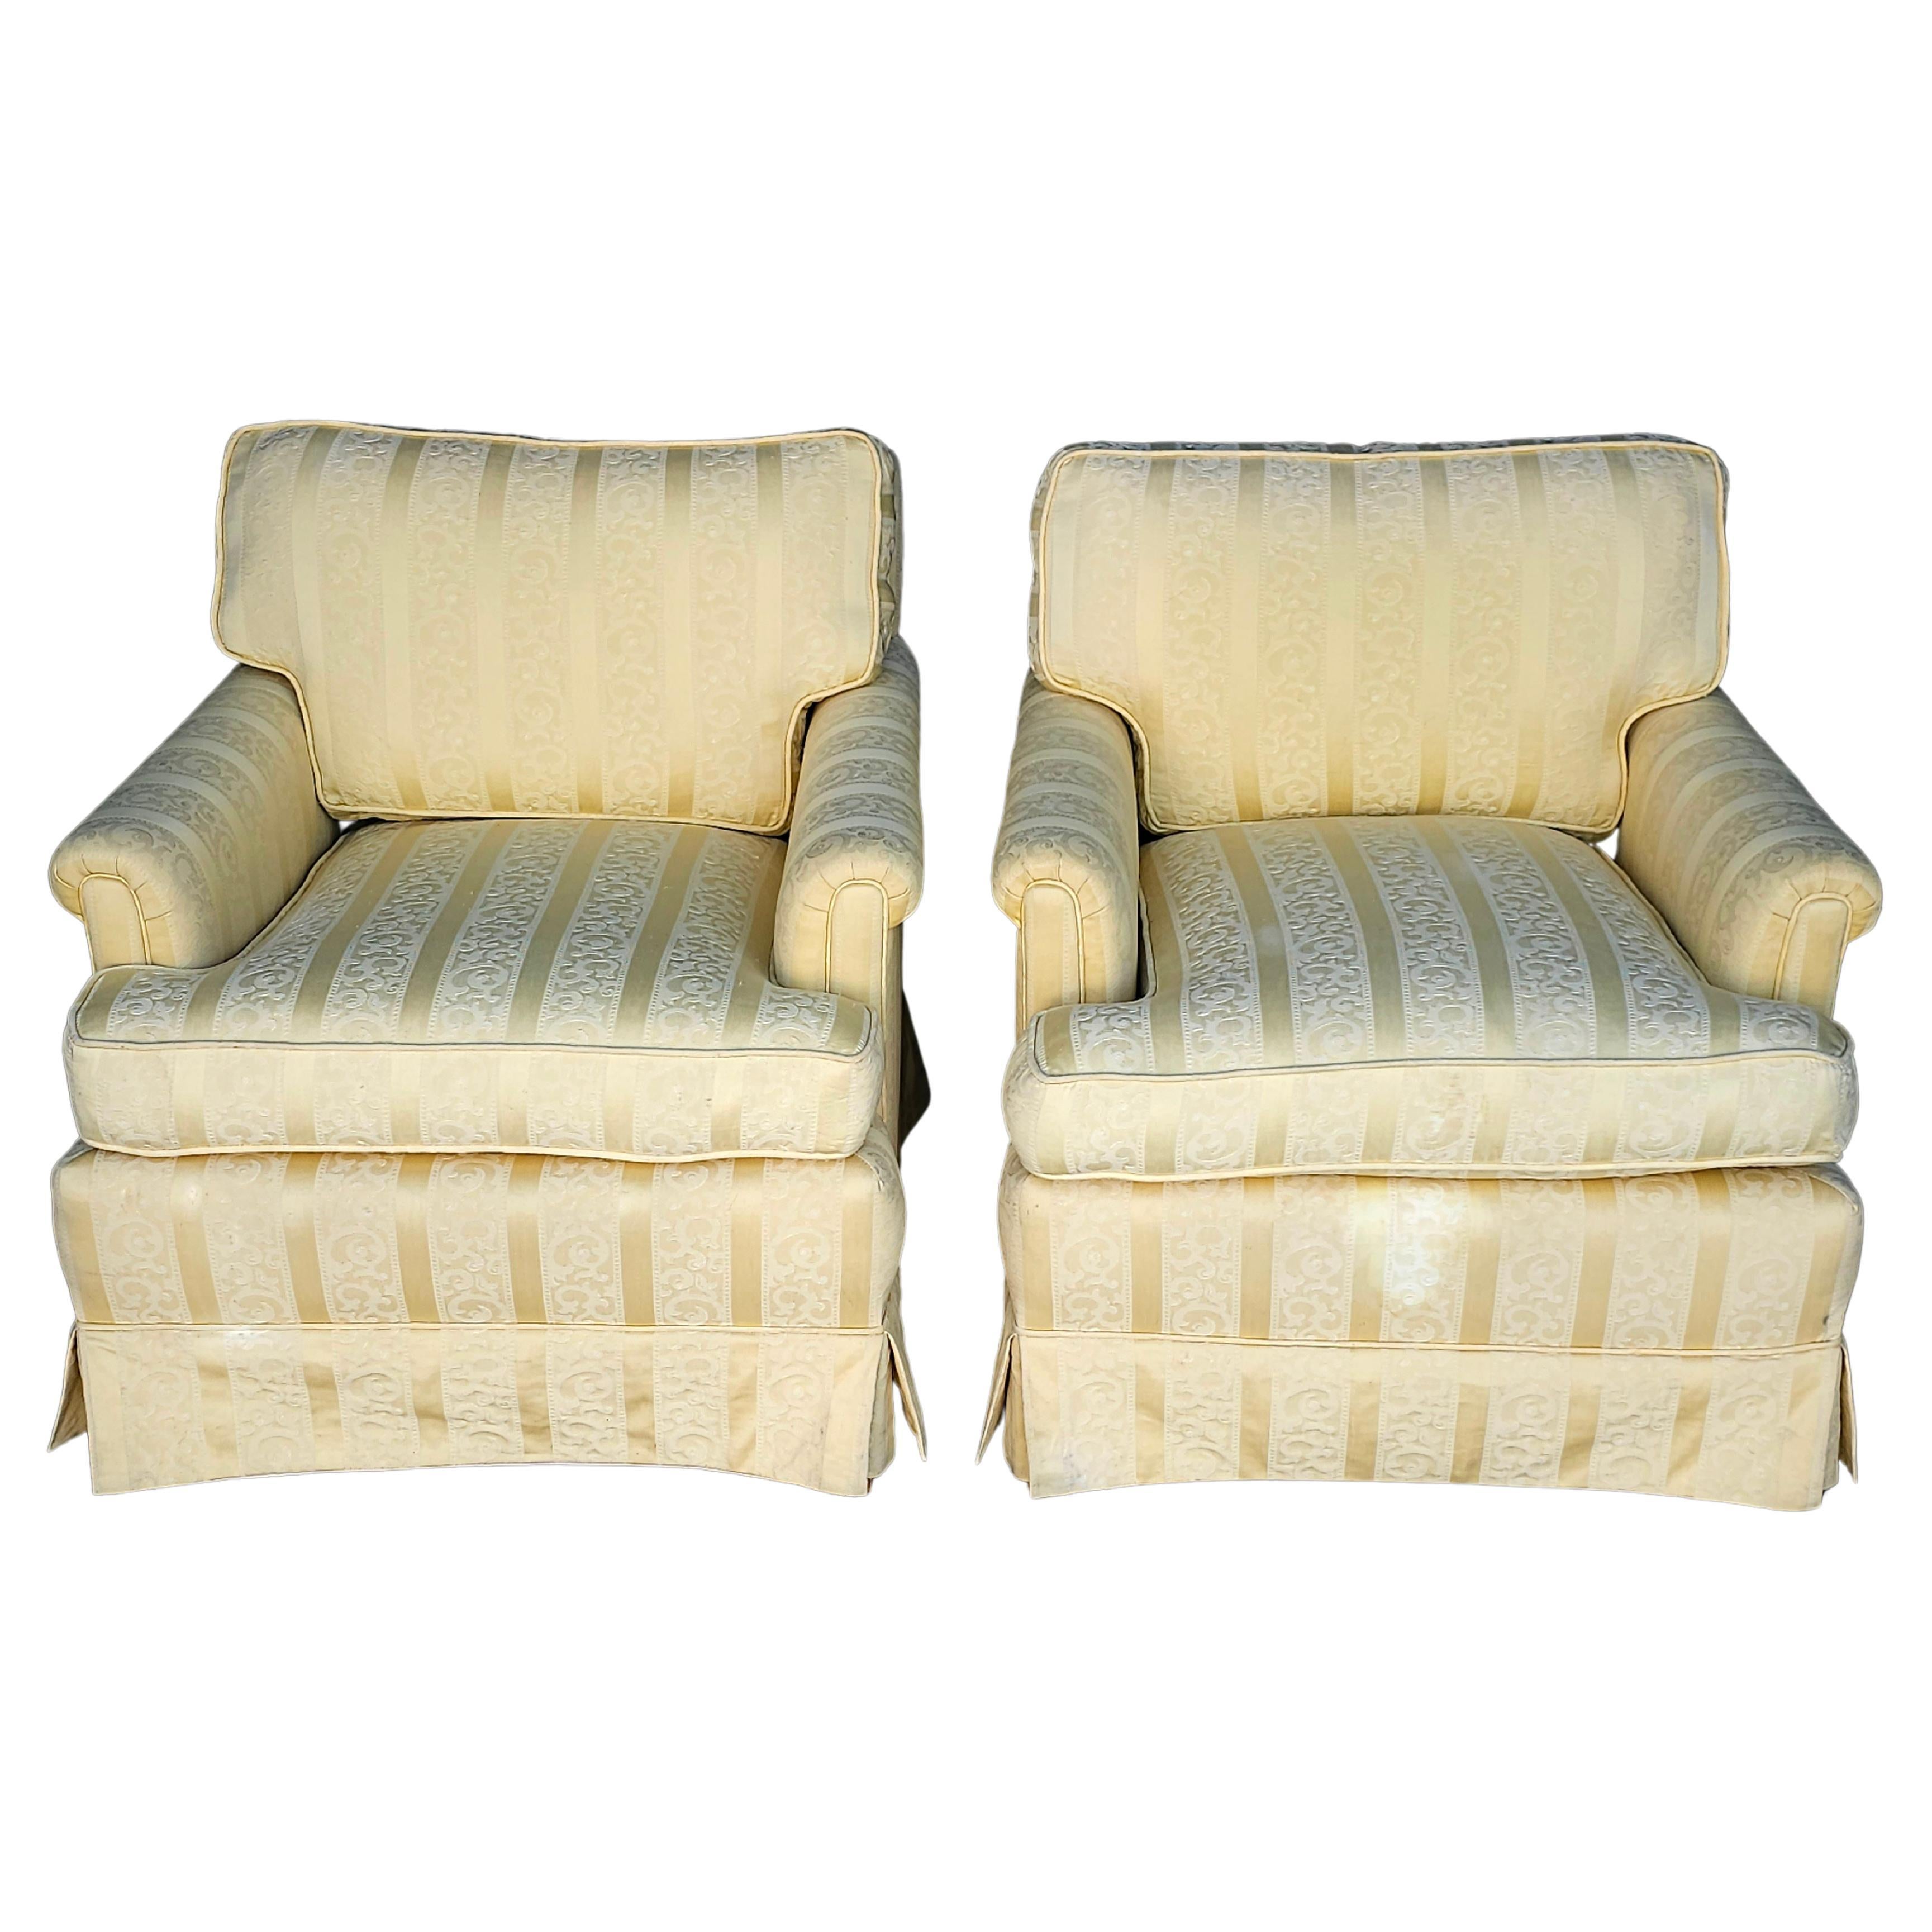 Pair of Mid 20th Century Yellow Upholstered Lounge Chairs